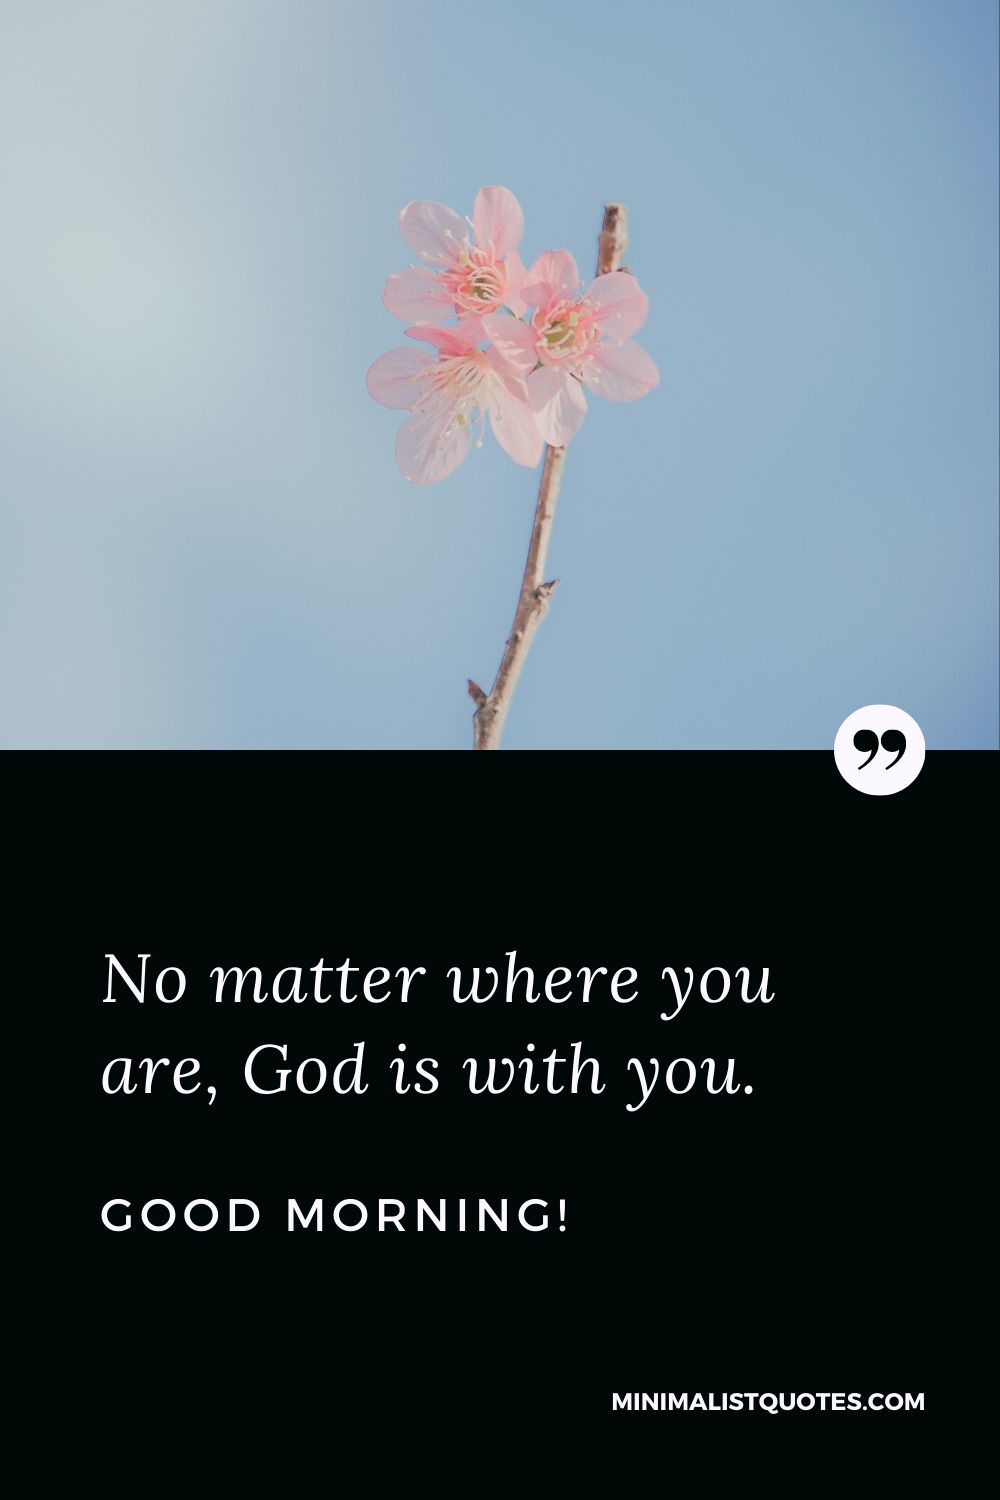 No matter where you are, God is with you. Good Morning!